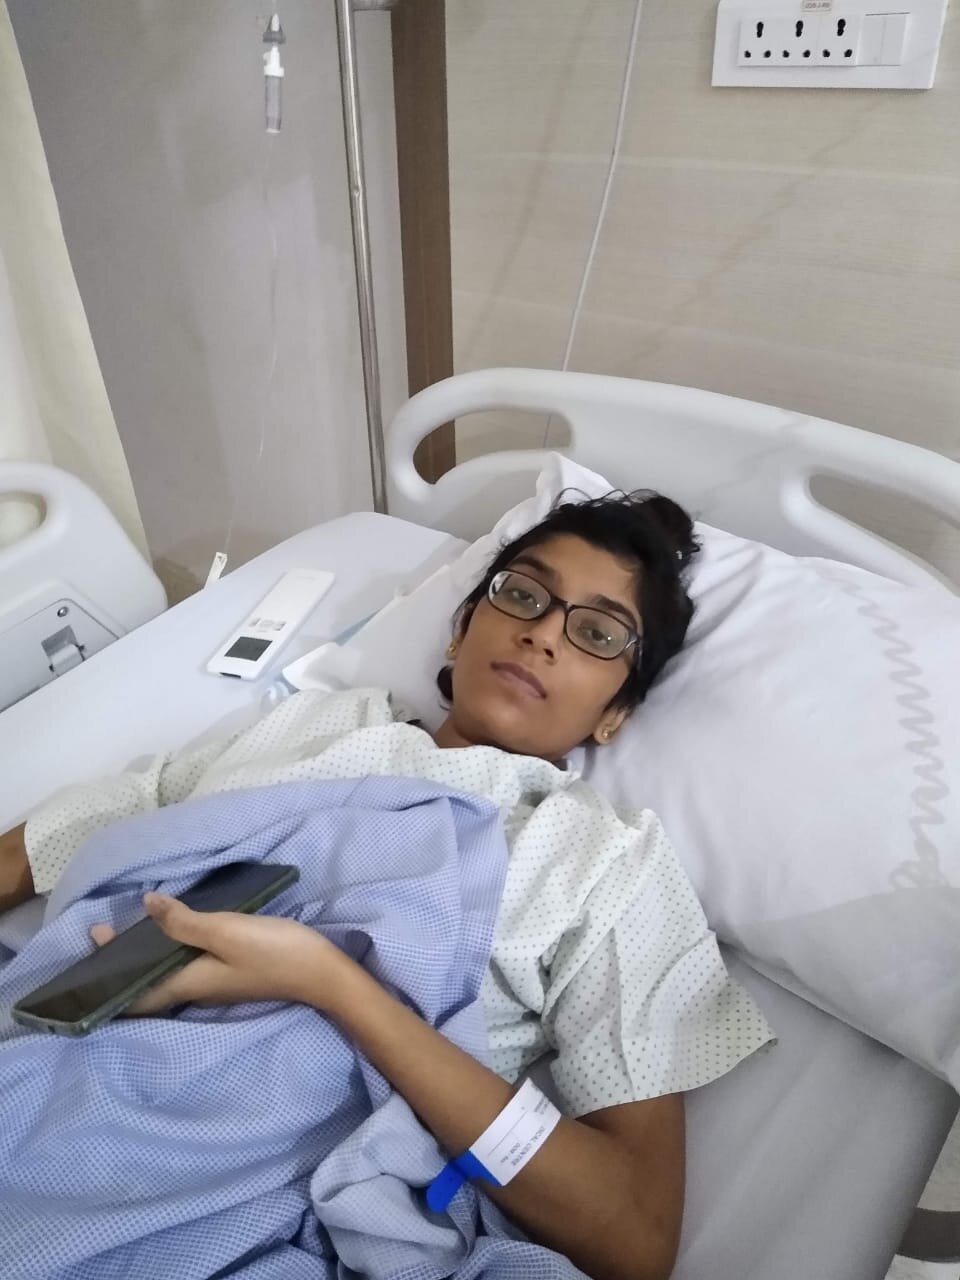 Image of Madhura laying in a hospital bed recuperating after an emergency hospitalization in the middle of the national lockdown.